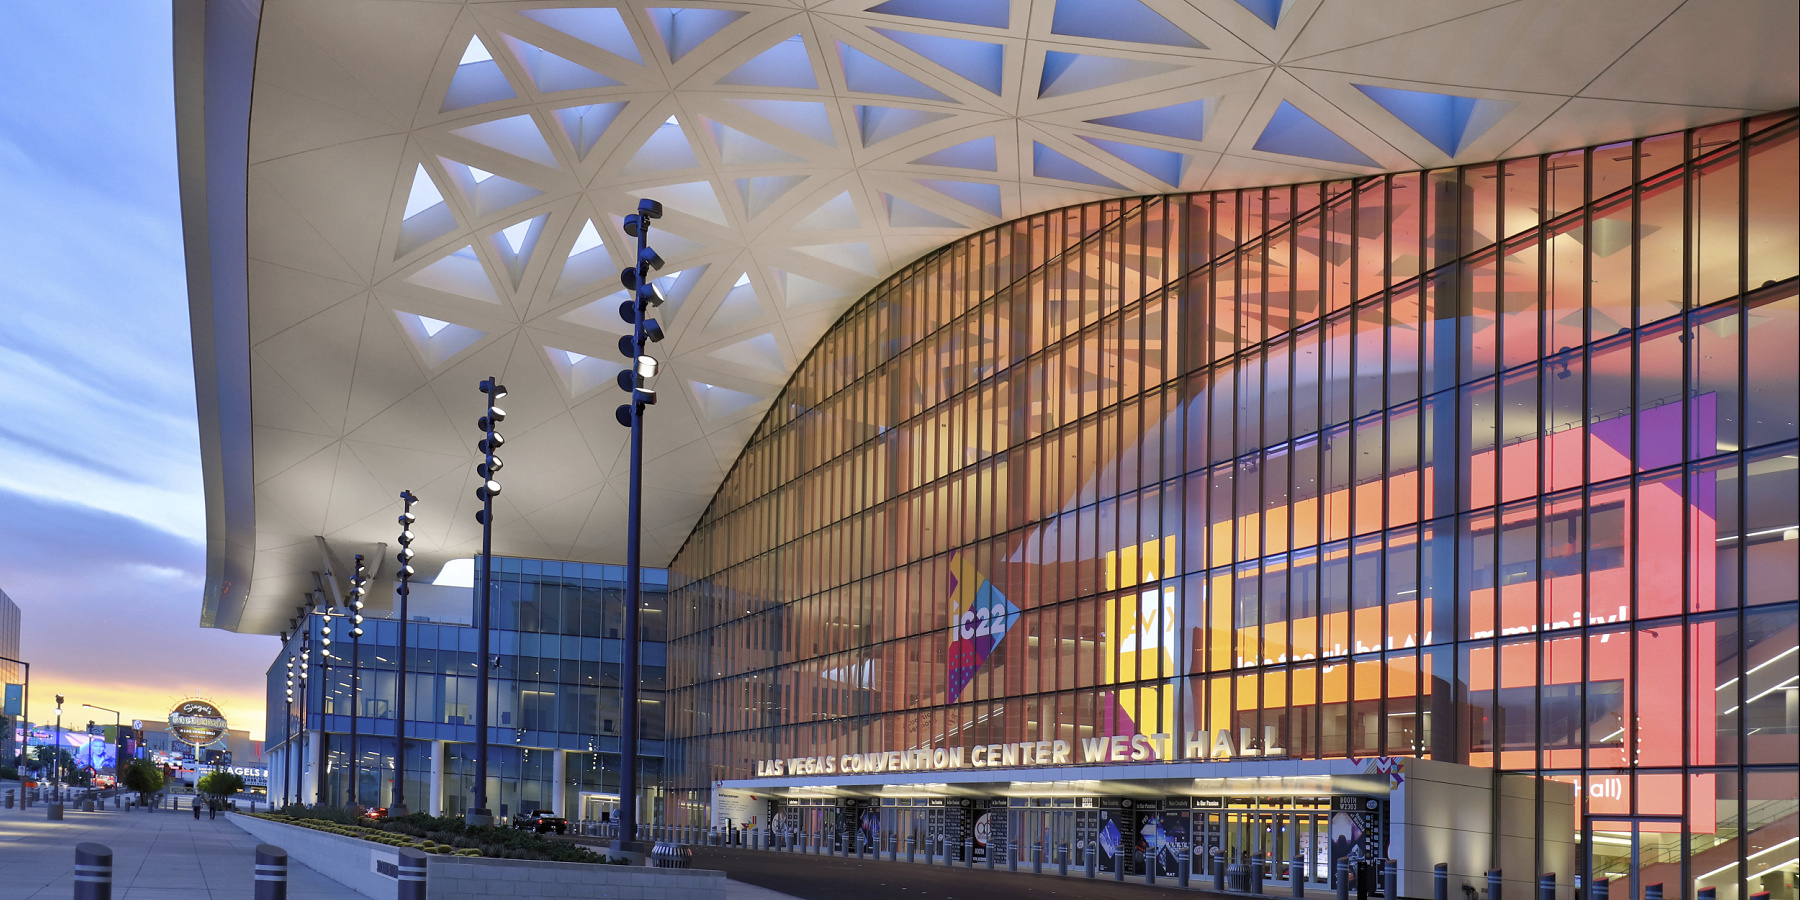 erco-led-lighting-for-the-las-vegas-convention-centre-erco